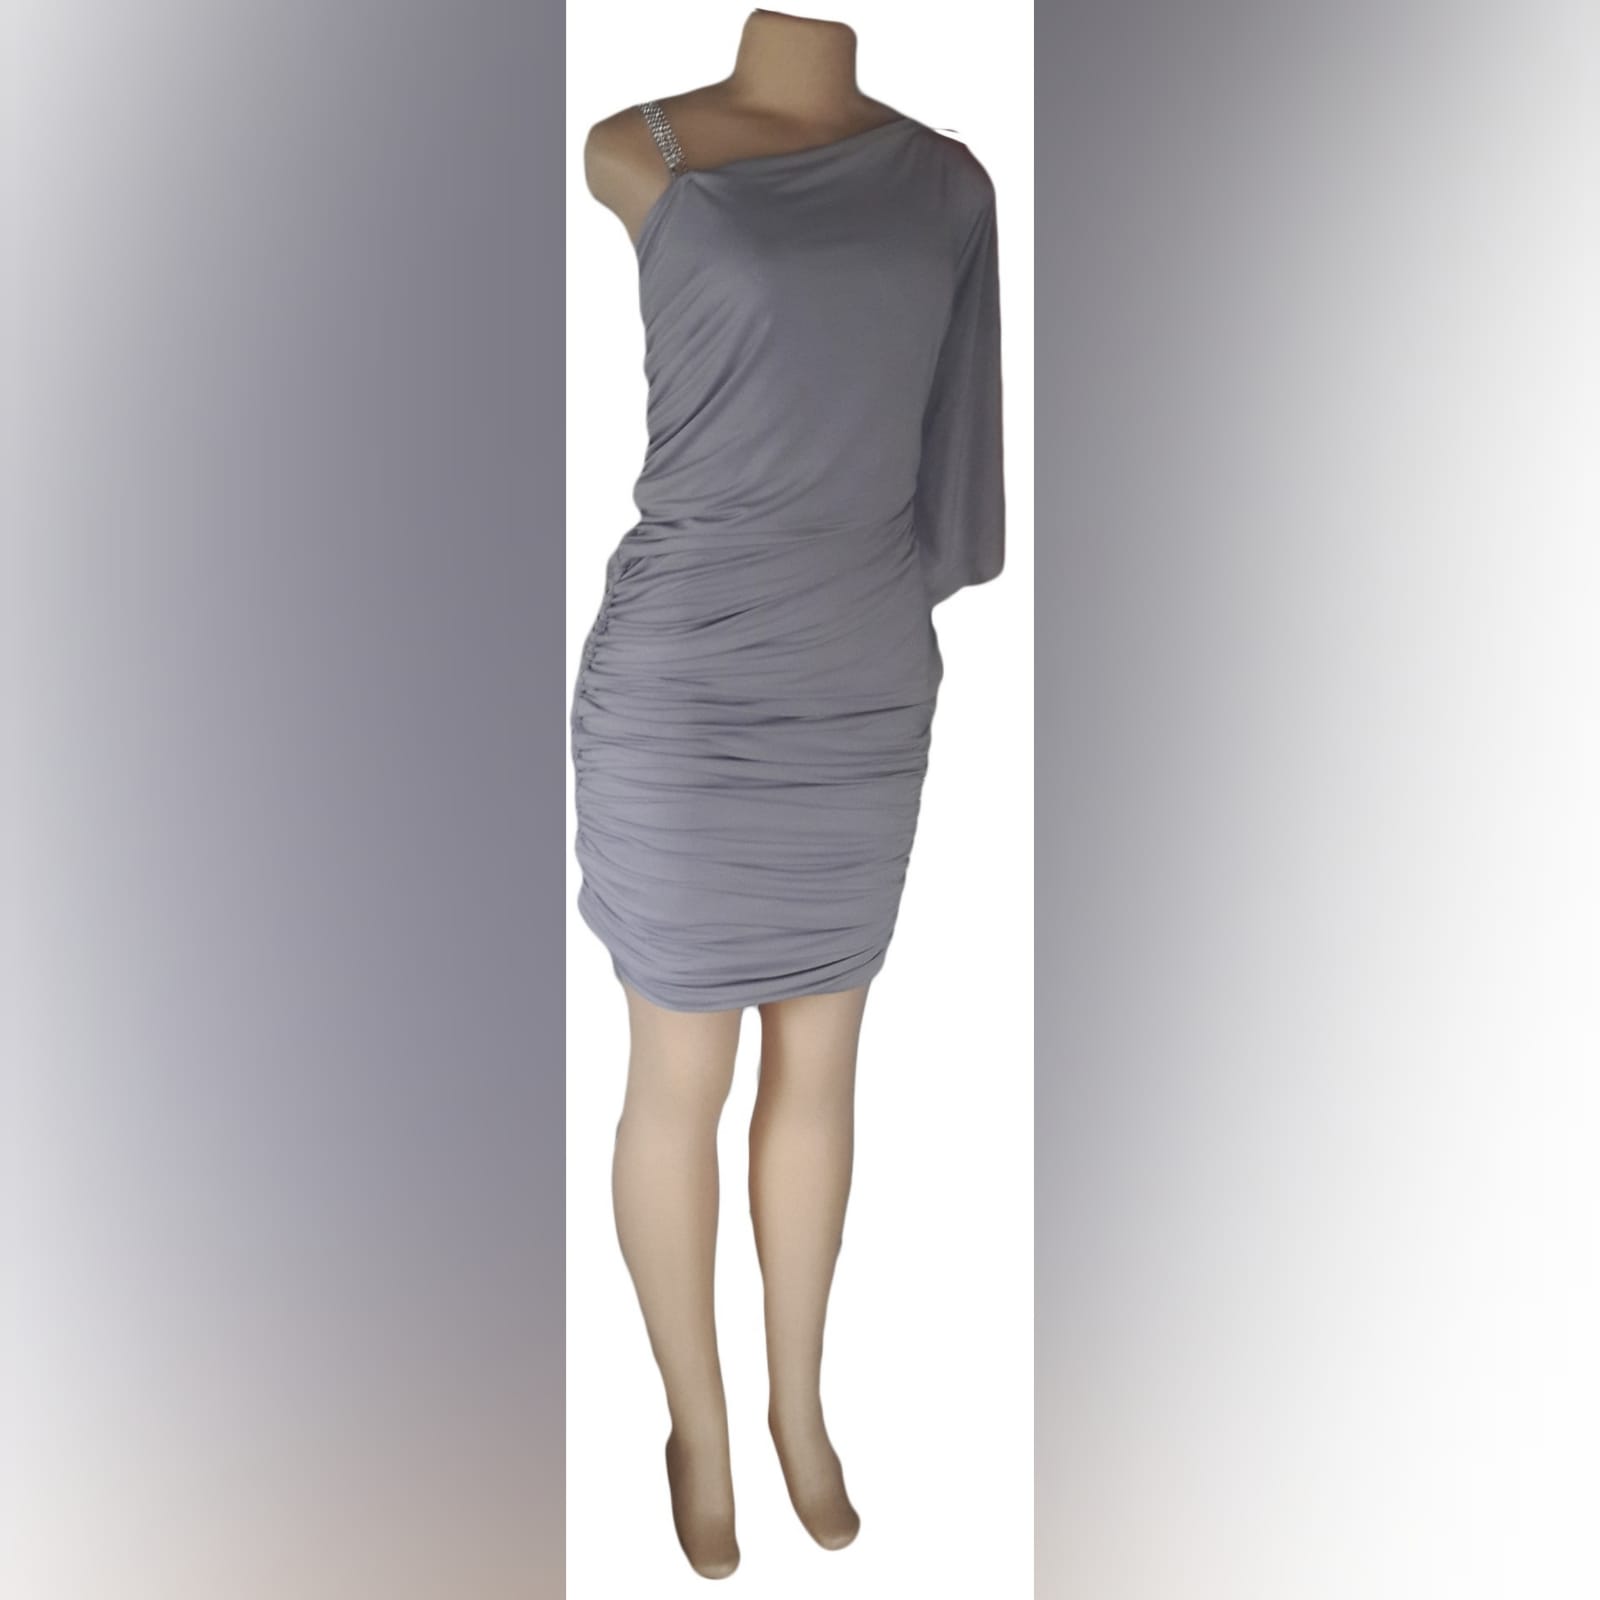 Light grey ruched knee length smart casual dress 4 light grey ruched knee length smart casual dress with one wide sleeve, an angular neckline and a removable diamante shoulder strap.